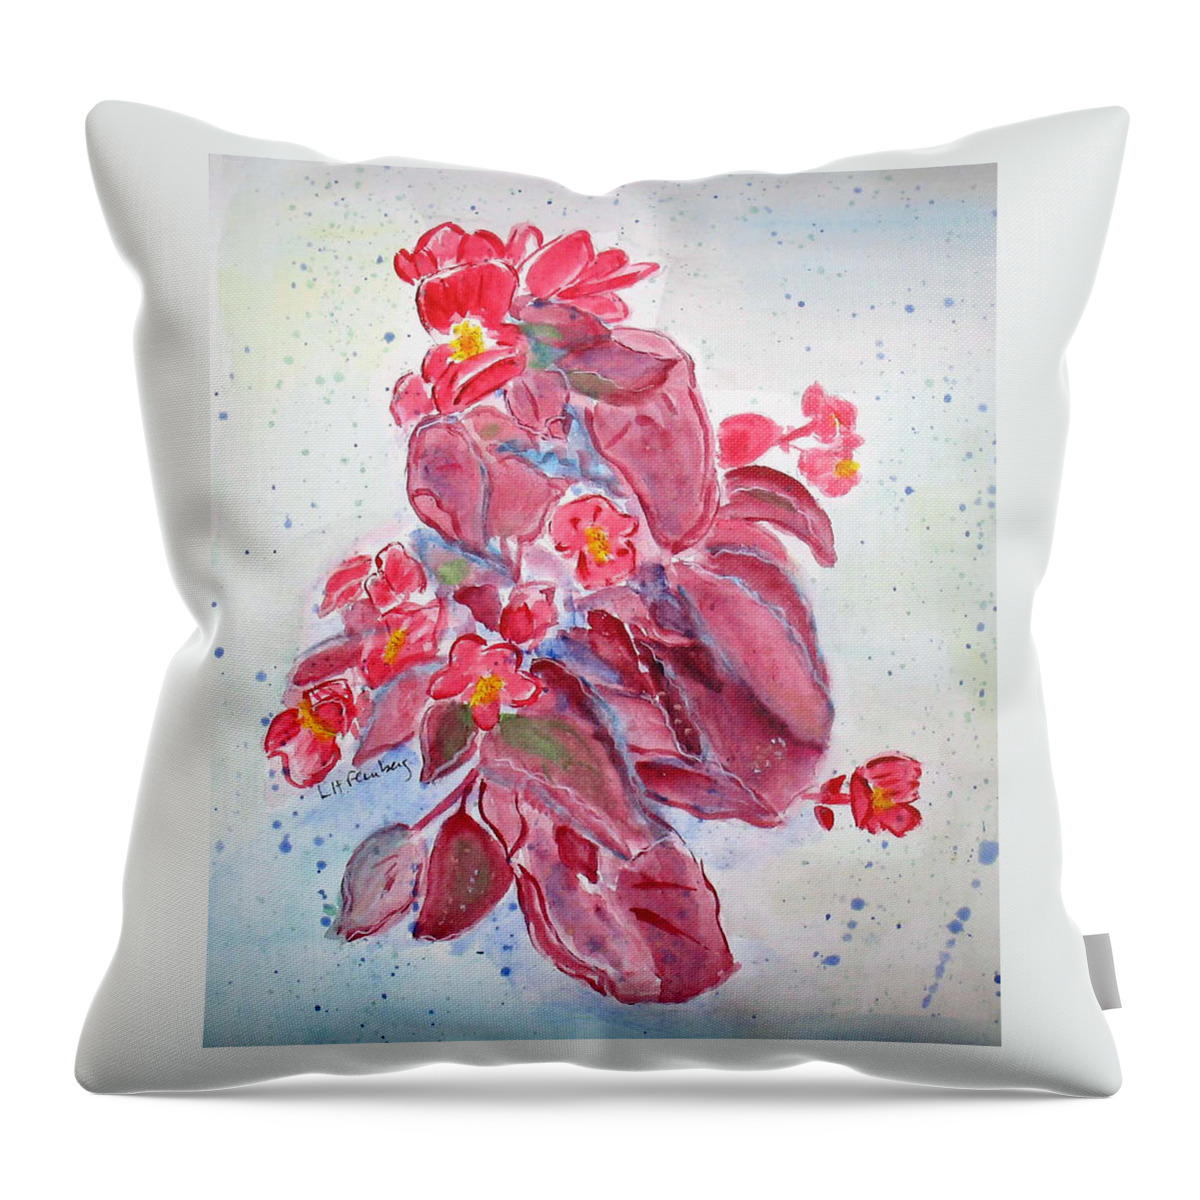 Flowers Throw Pillow featuring the painting Red Begonias by Linda Feinberg